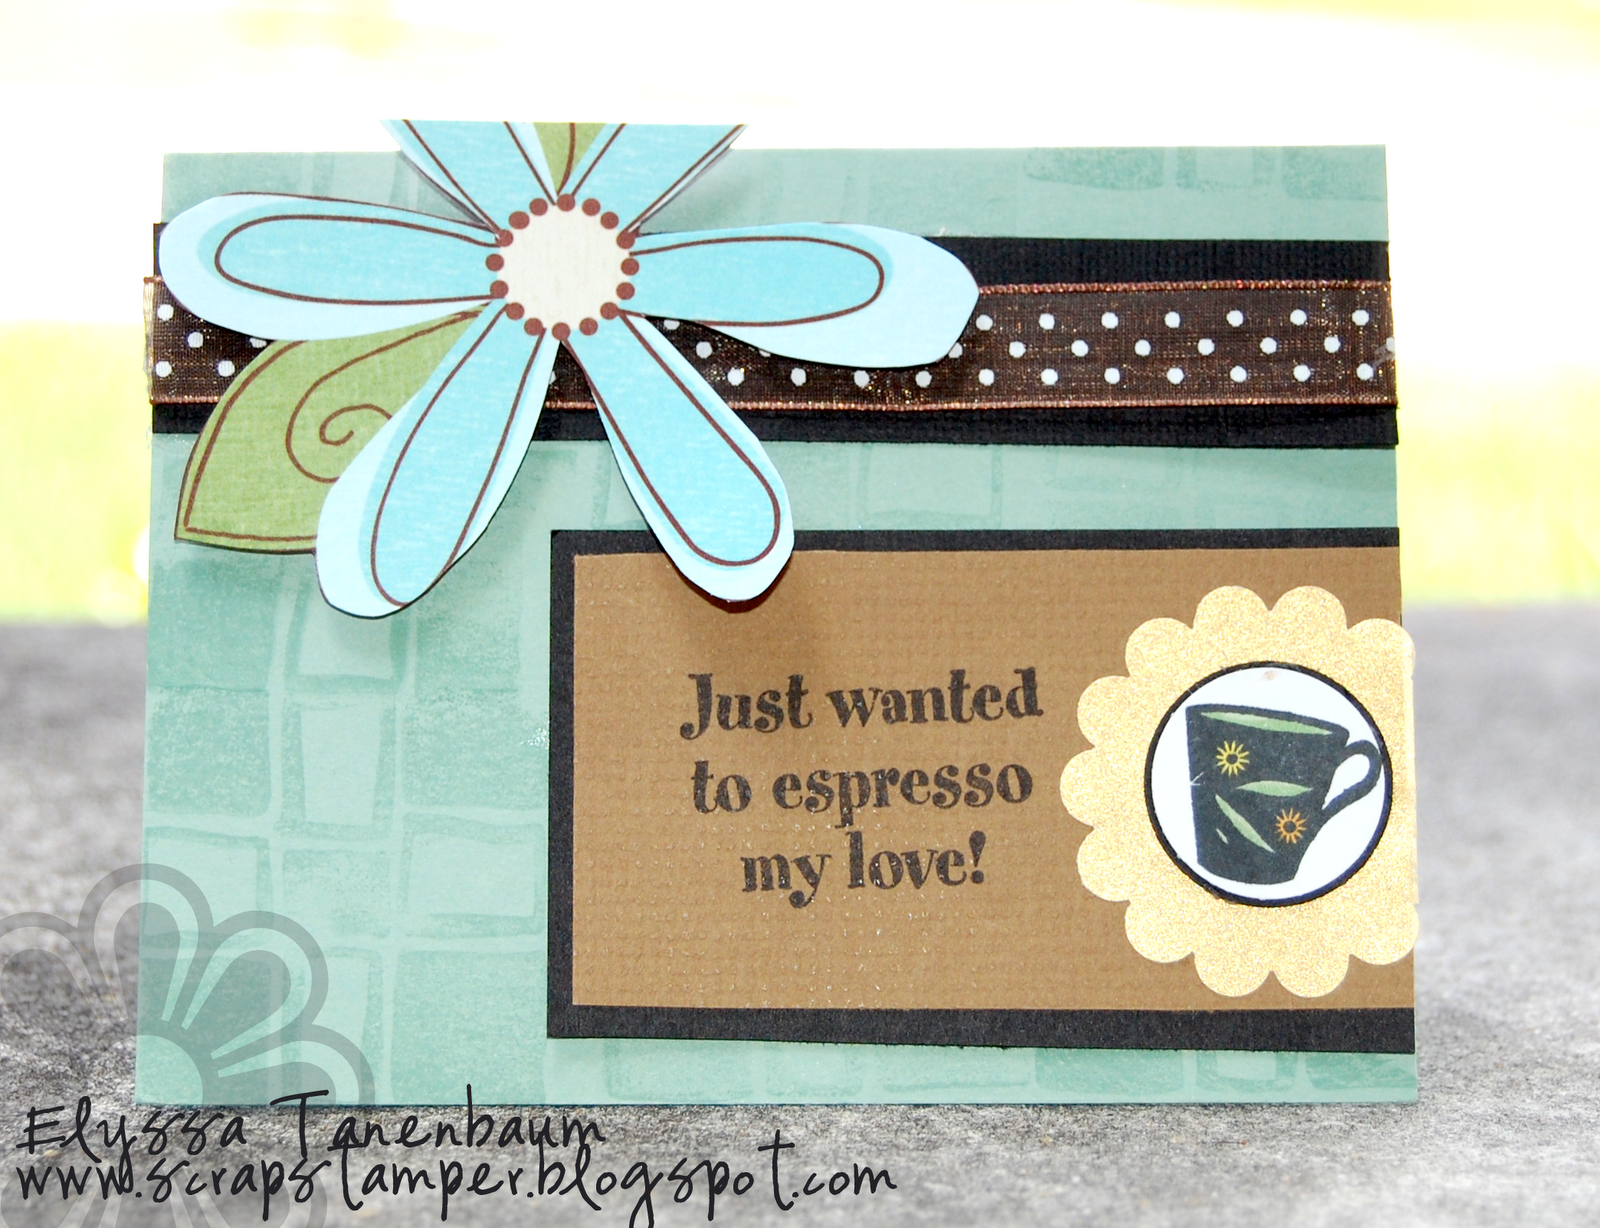 [espressoingmylove.png]